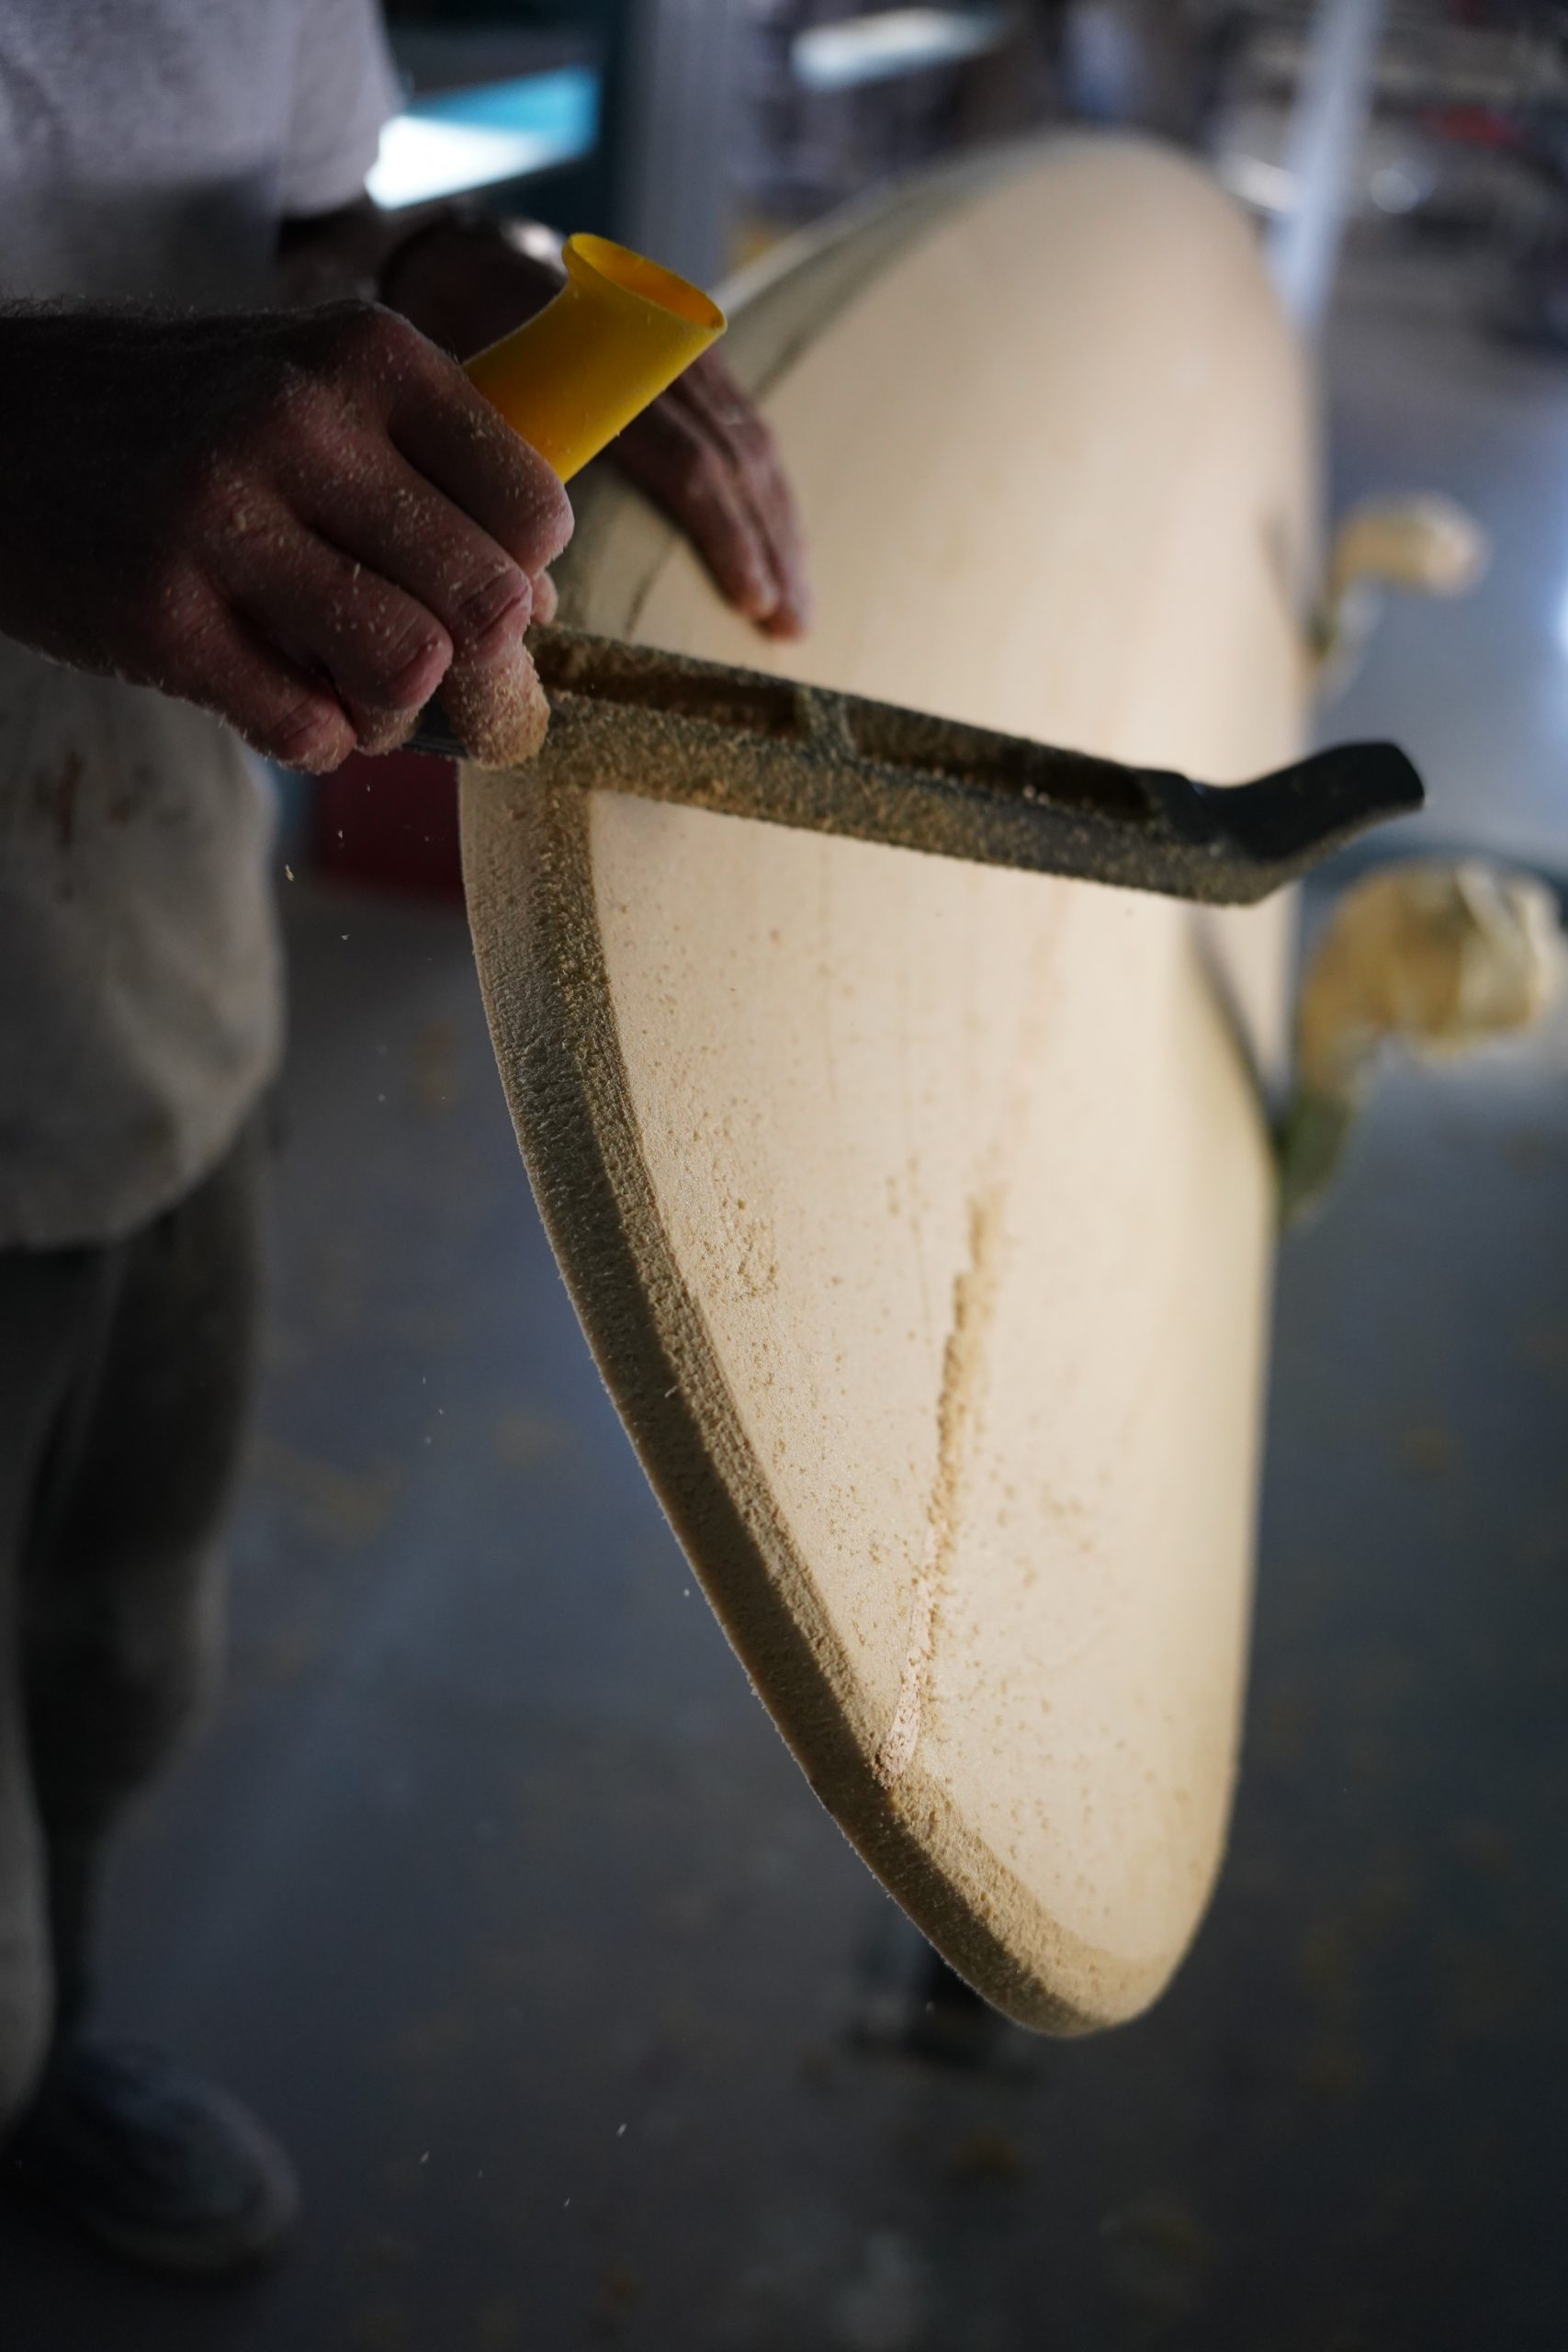 Shaper is using a surform to work on the nose of the surfboard